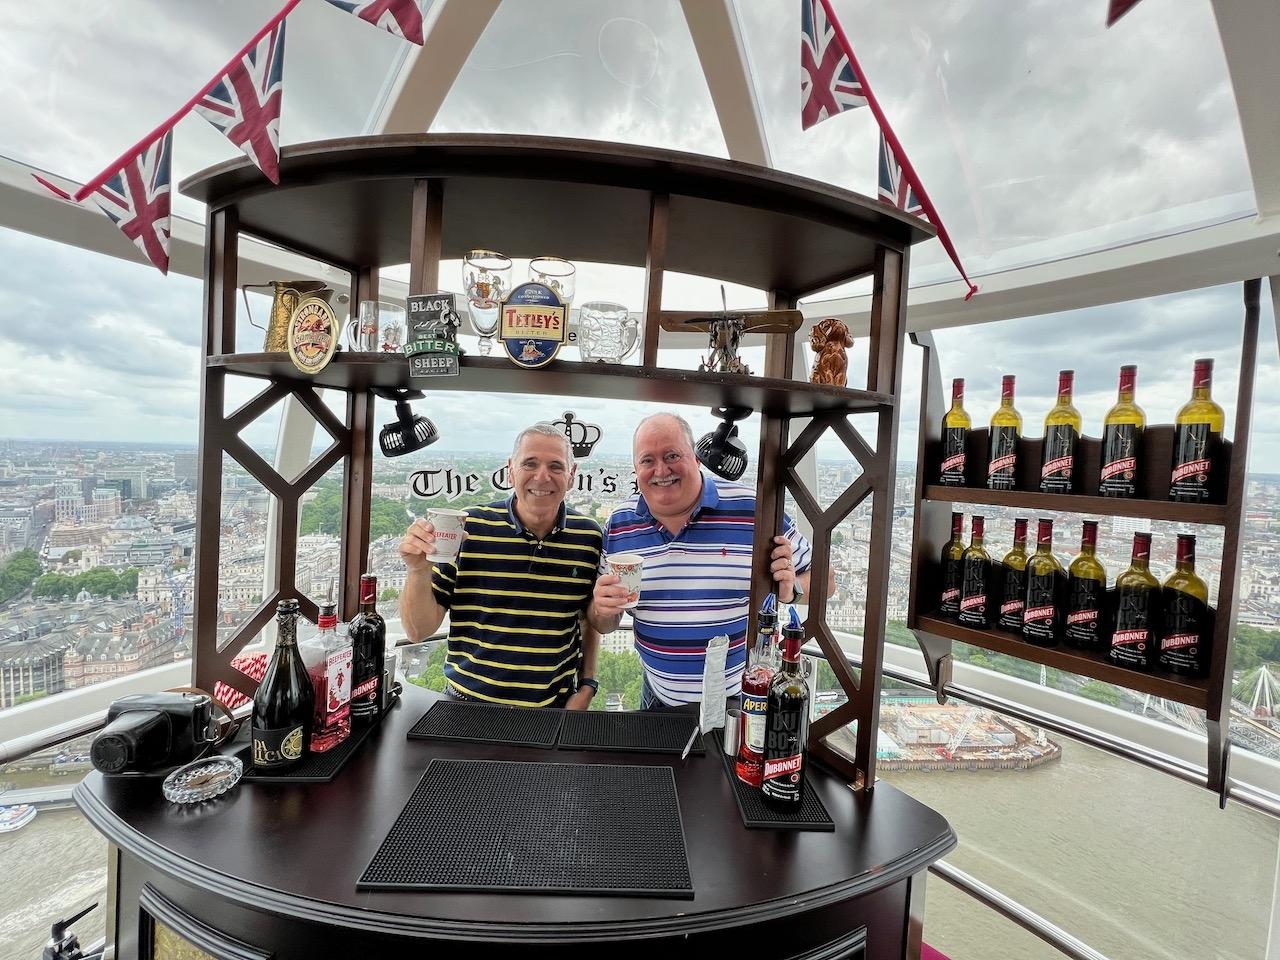 Touring The London Eye in the Pub Car!